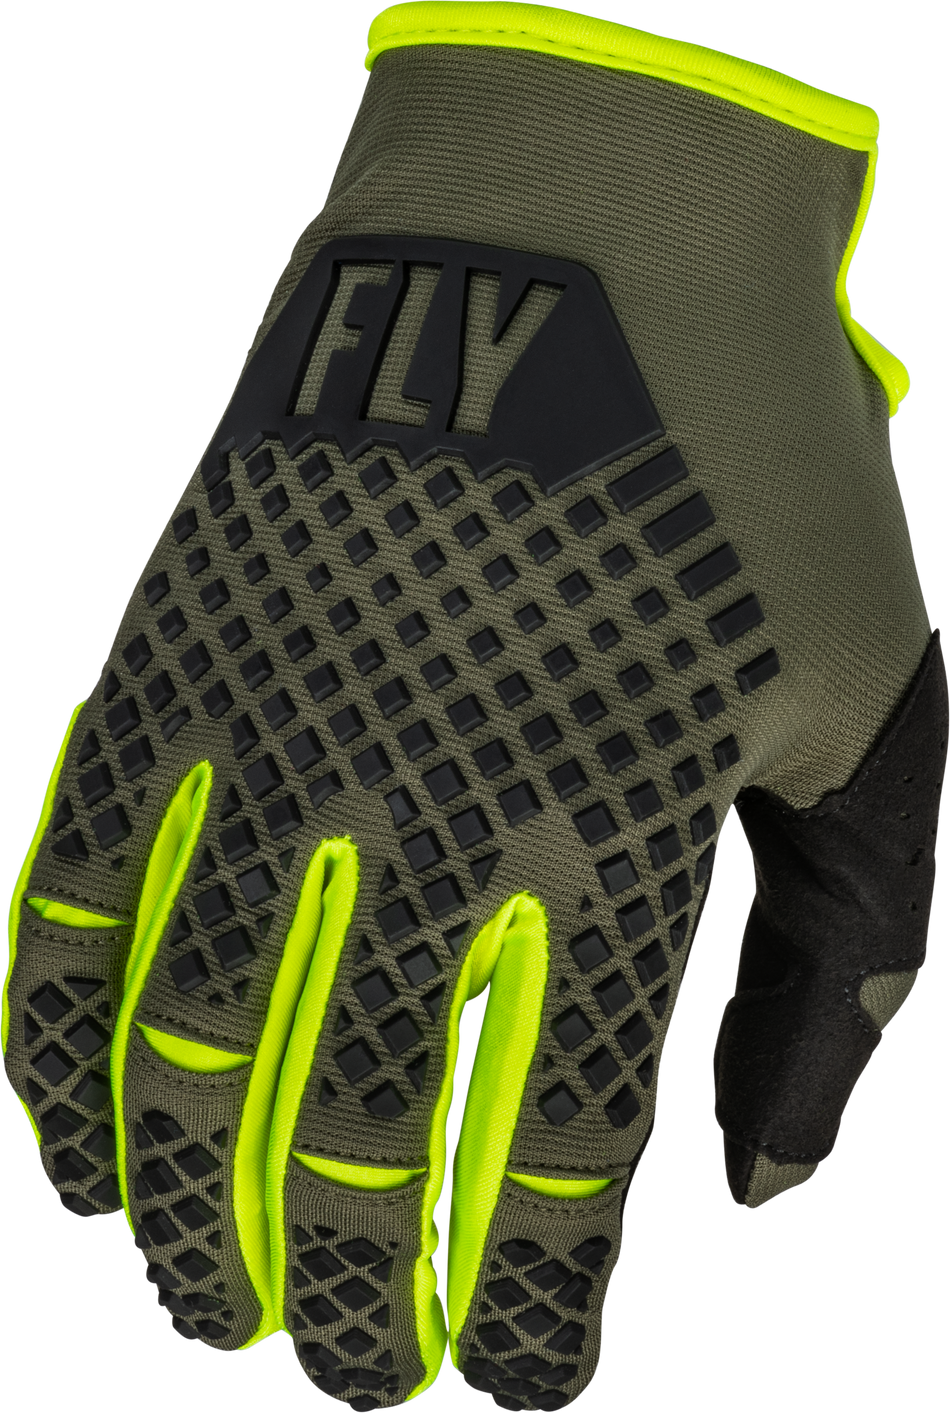 FLY RACING Youth Kinetic Gloves Olive Green/Hi-Vis Ym 376-413YM